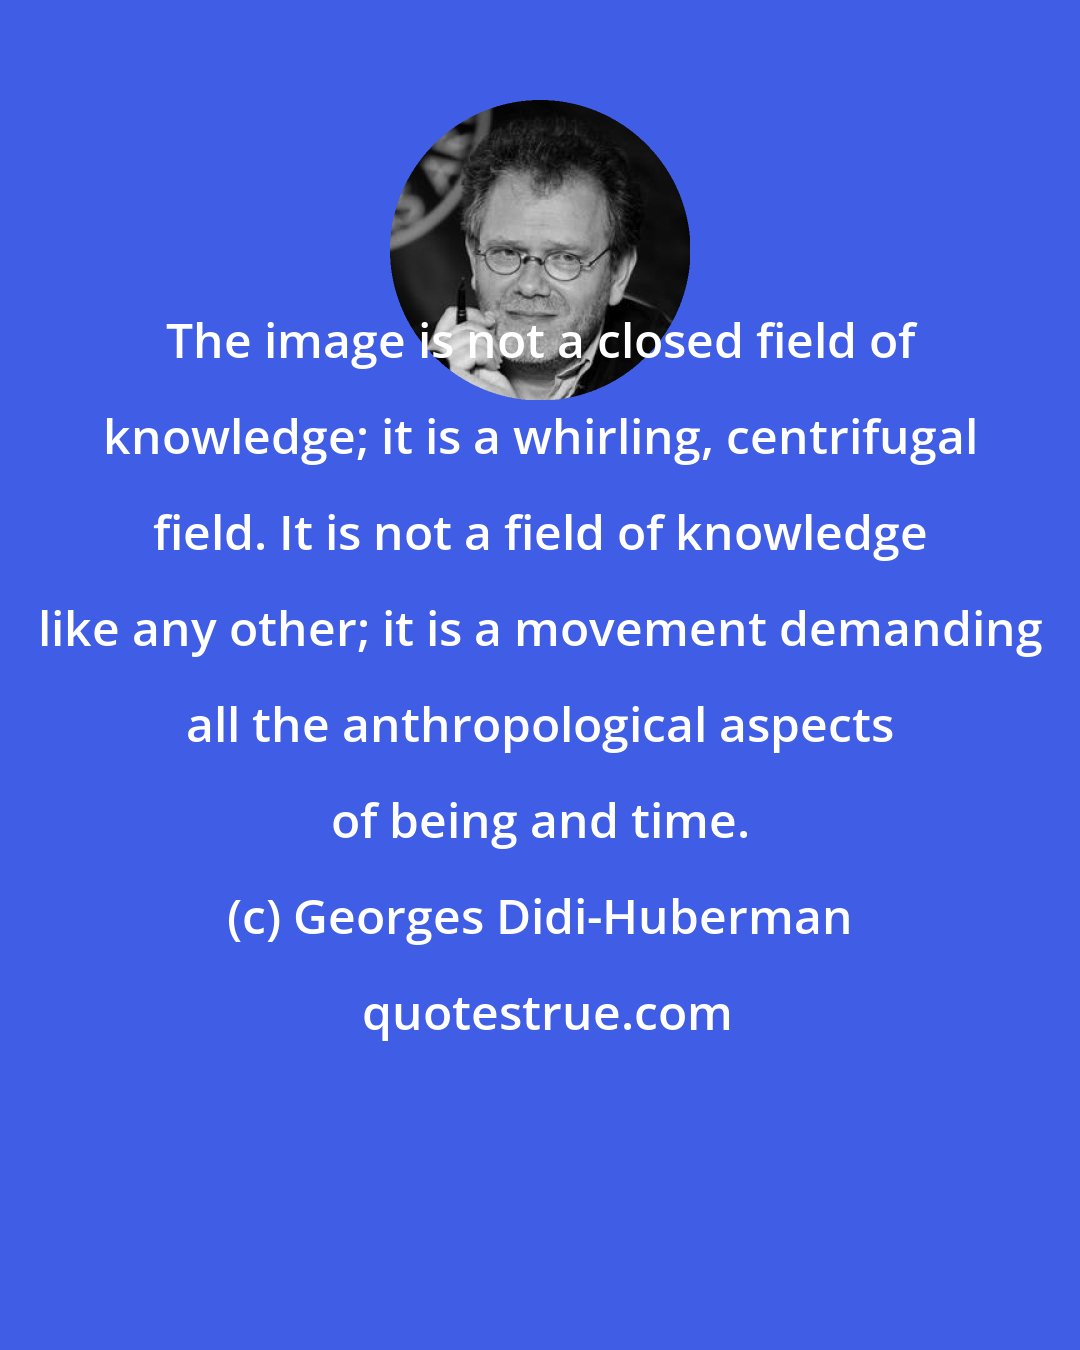 Georges Didi-Huberman: The image is not a closed field of knowledge; it is a whirling, centrifugal field. It is not a field of knowledge like any other; it is a movement demanding all the anthropological aspects of being and time.